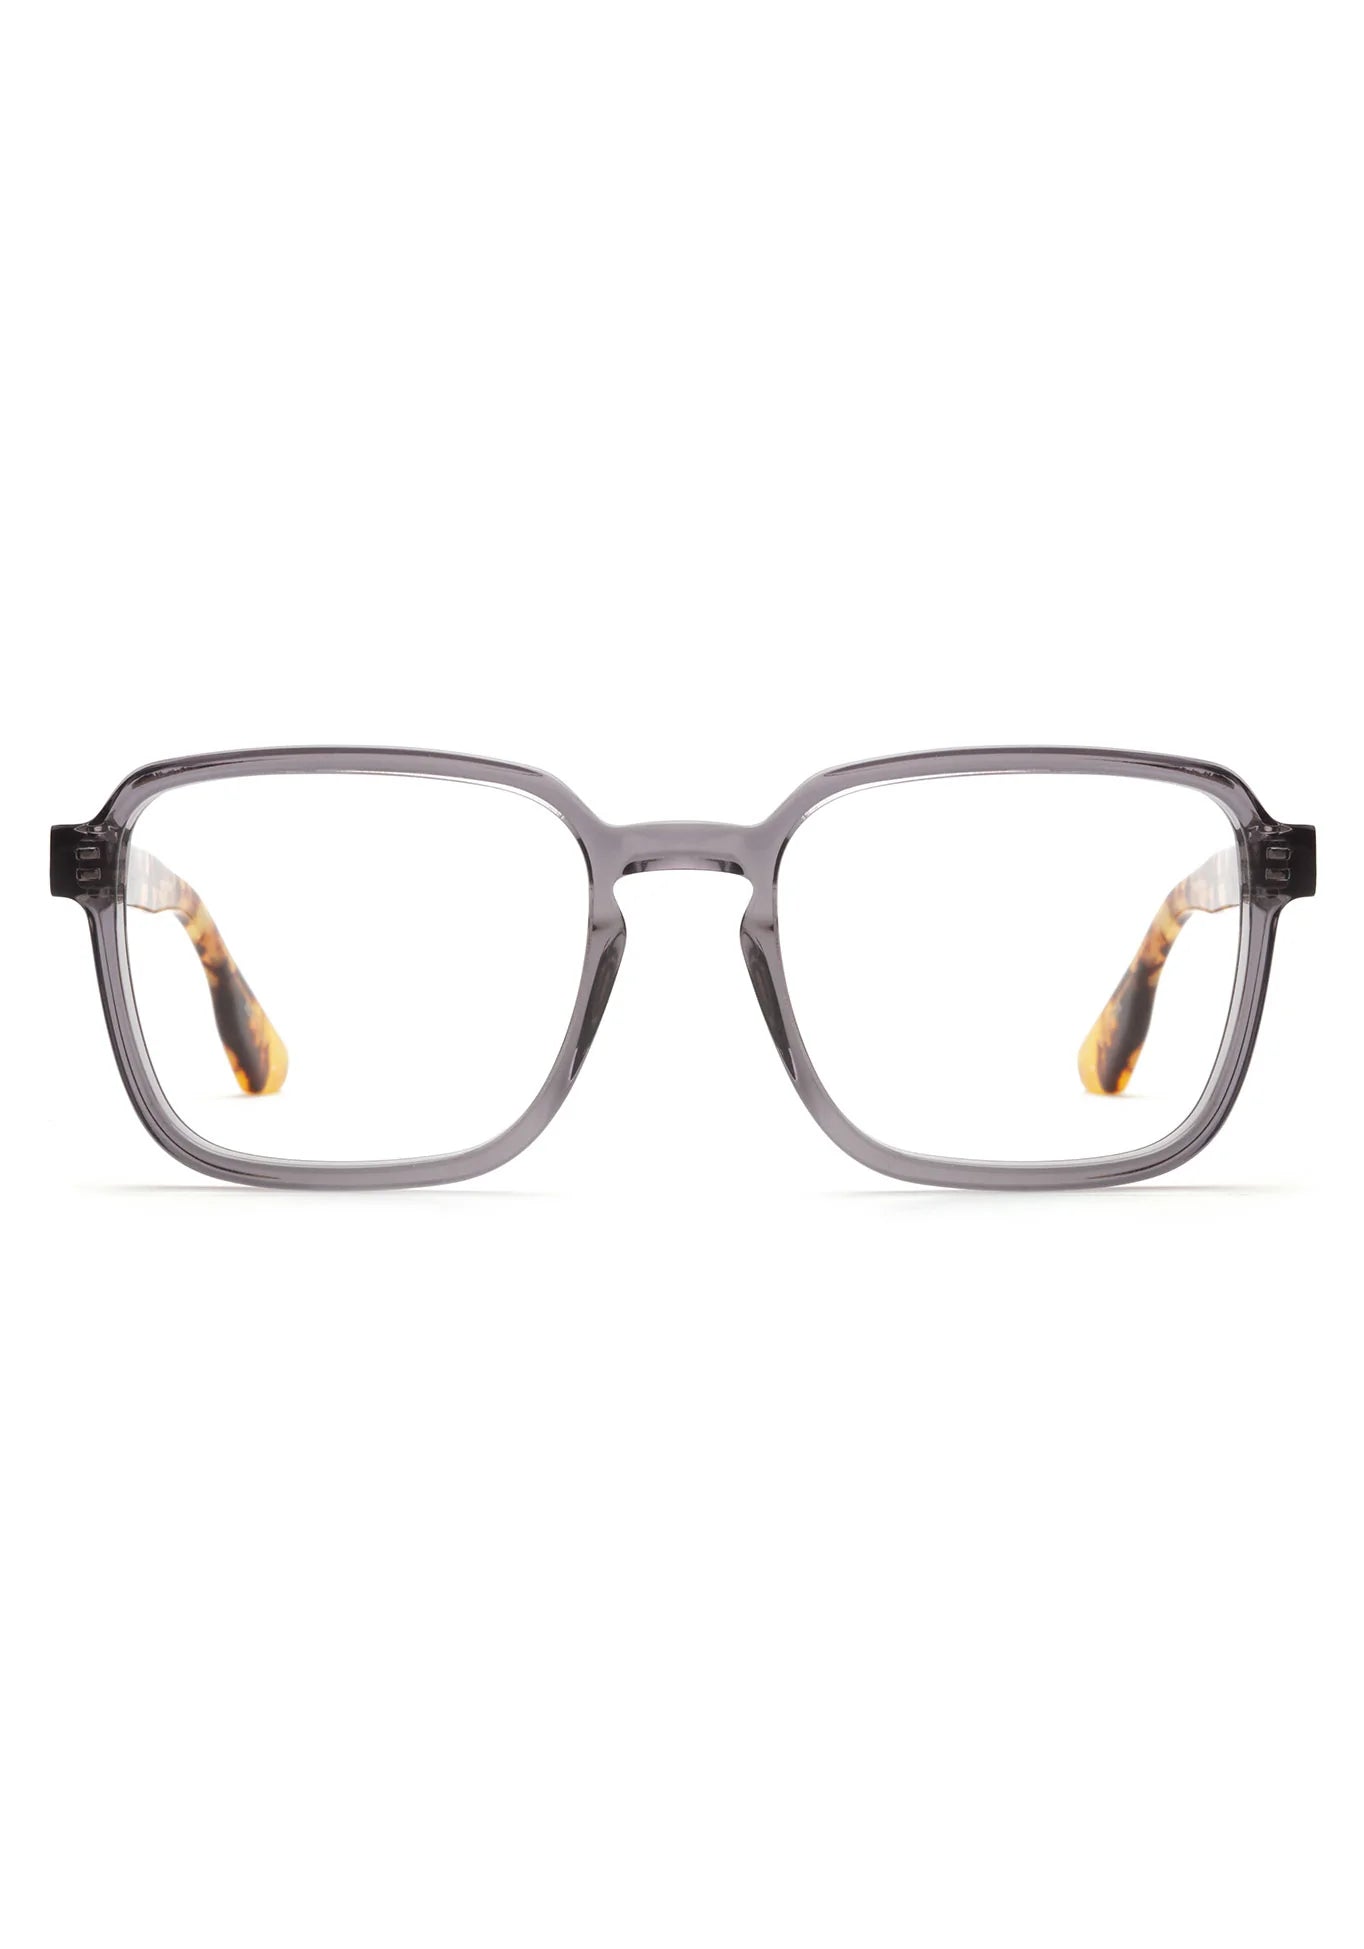 RUFFIN | Ash + Chai Handcrafted, Grey and Tortoise Shell Acetate KREWE Eyeglasses